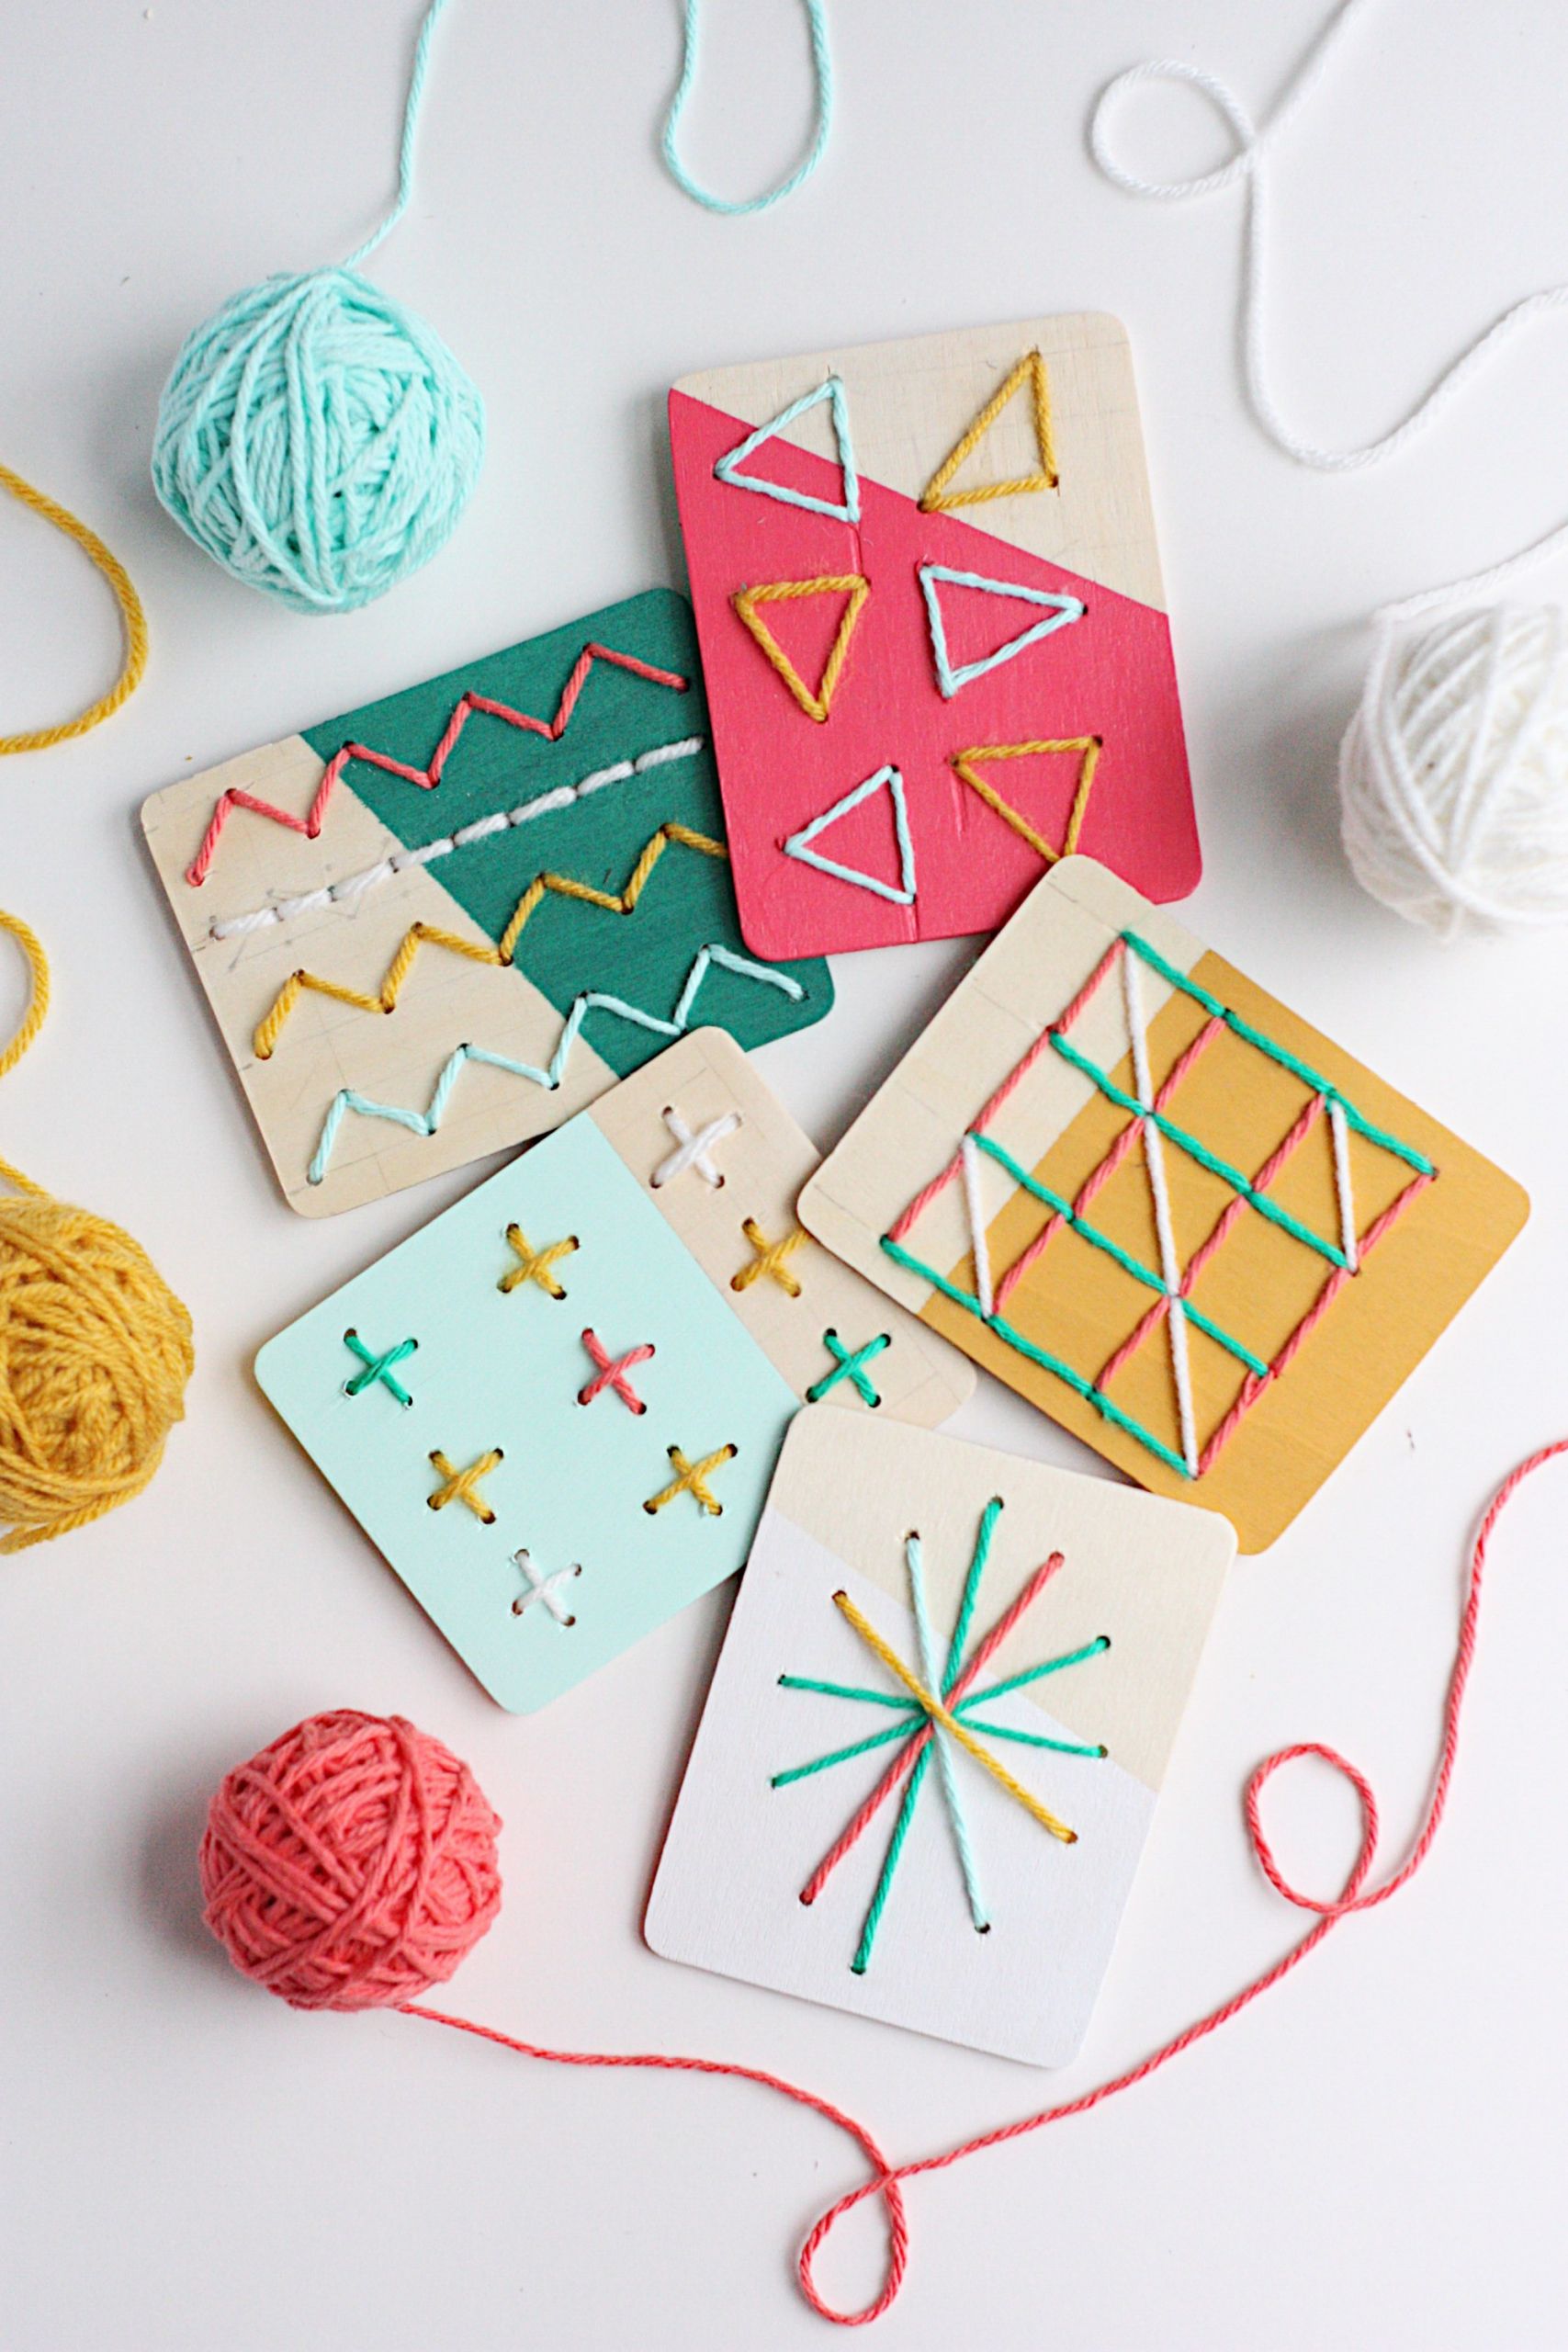 Project For Kids
 11 DIY Yarn Crafts That Will Amaze Your Kids Shelterness